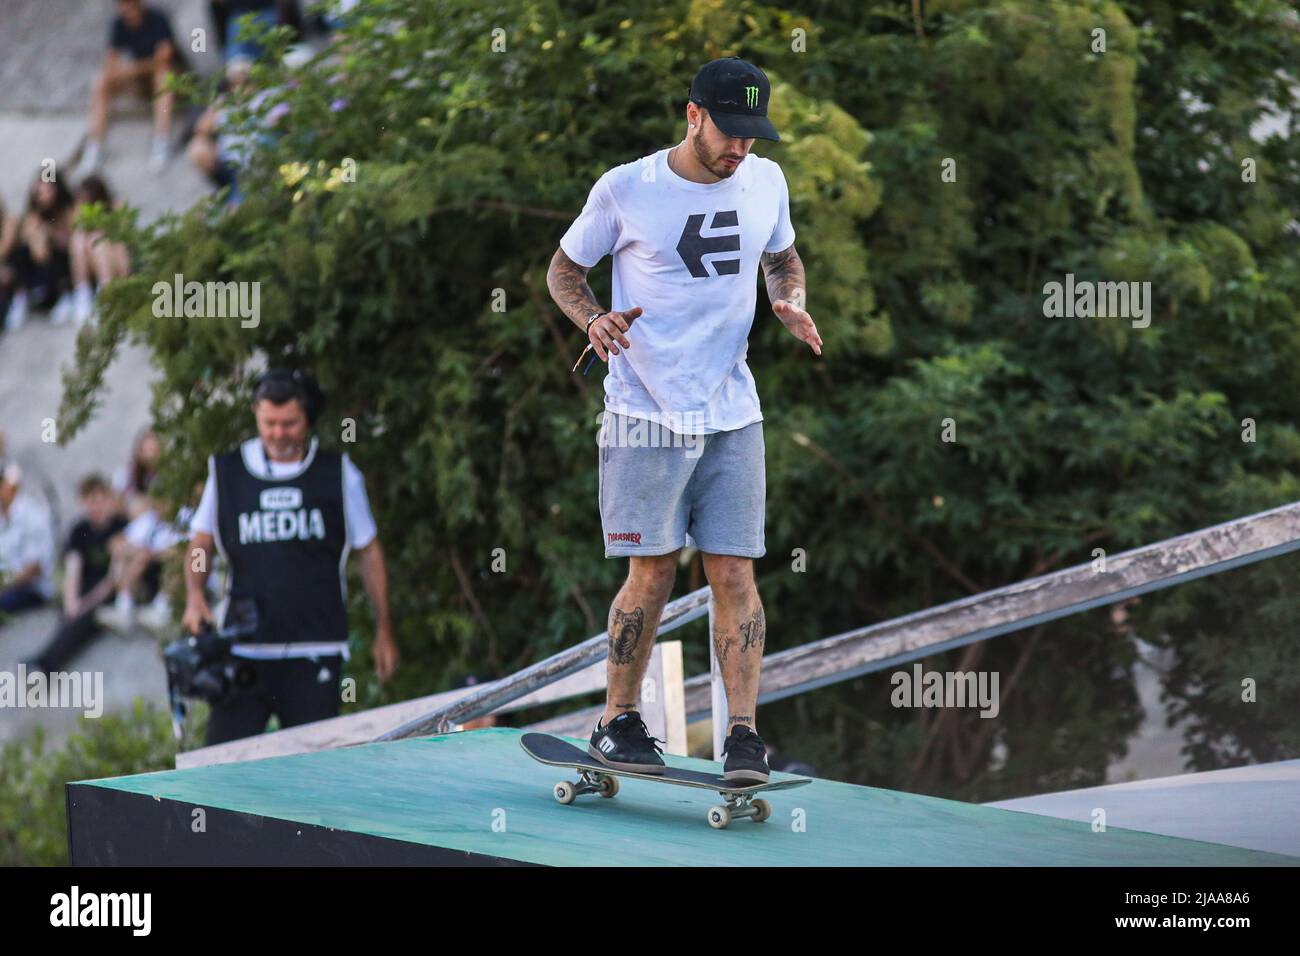 Aurelien Giraud the French skateboarder the SKATEBOARD STREET PRO MEN FINAL of the FISE sports event on May 28, 2022 Montpellier, Fran Stock Photo - Alamy